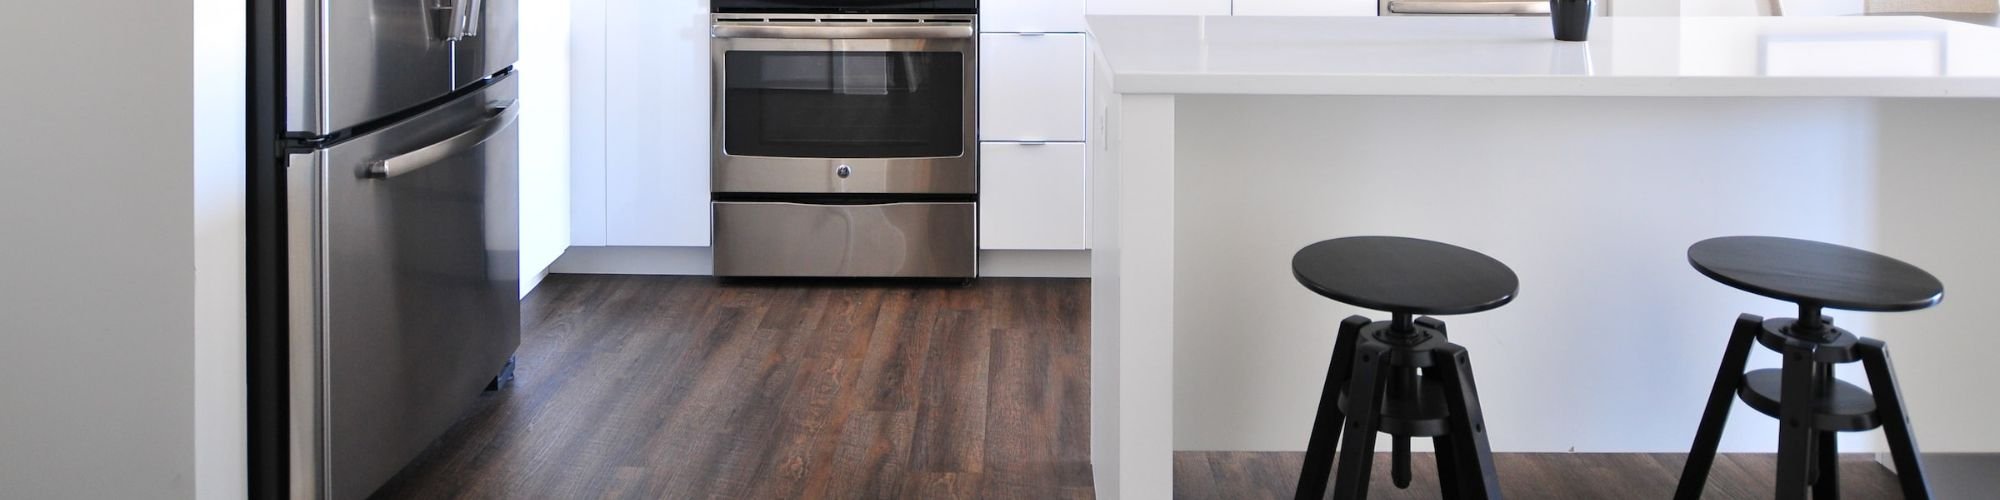 Choose from a wide variety of hardwood styles from Family Floors & More